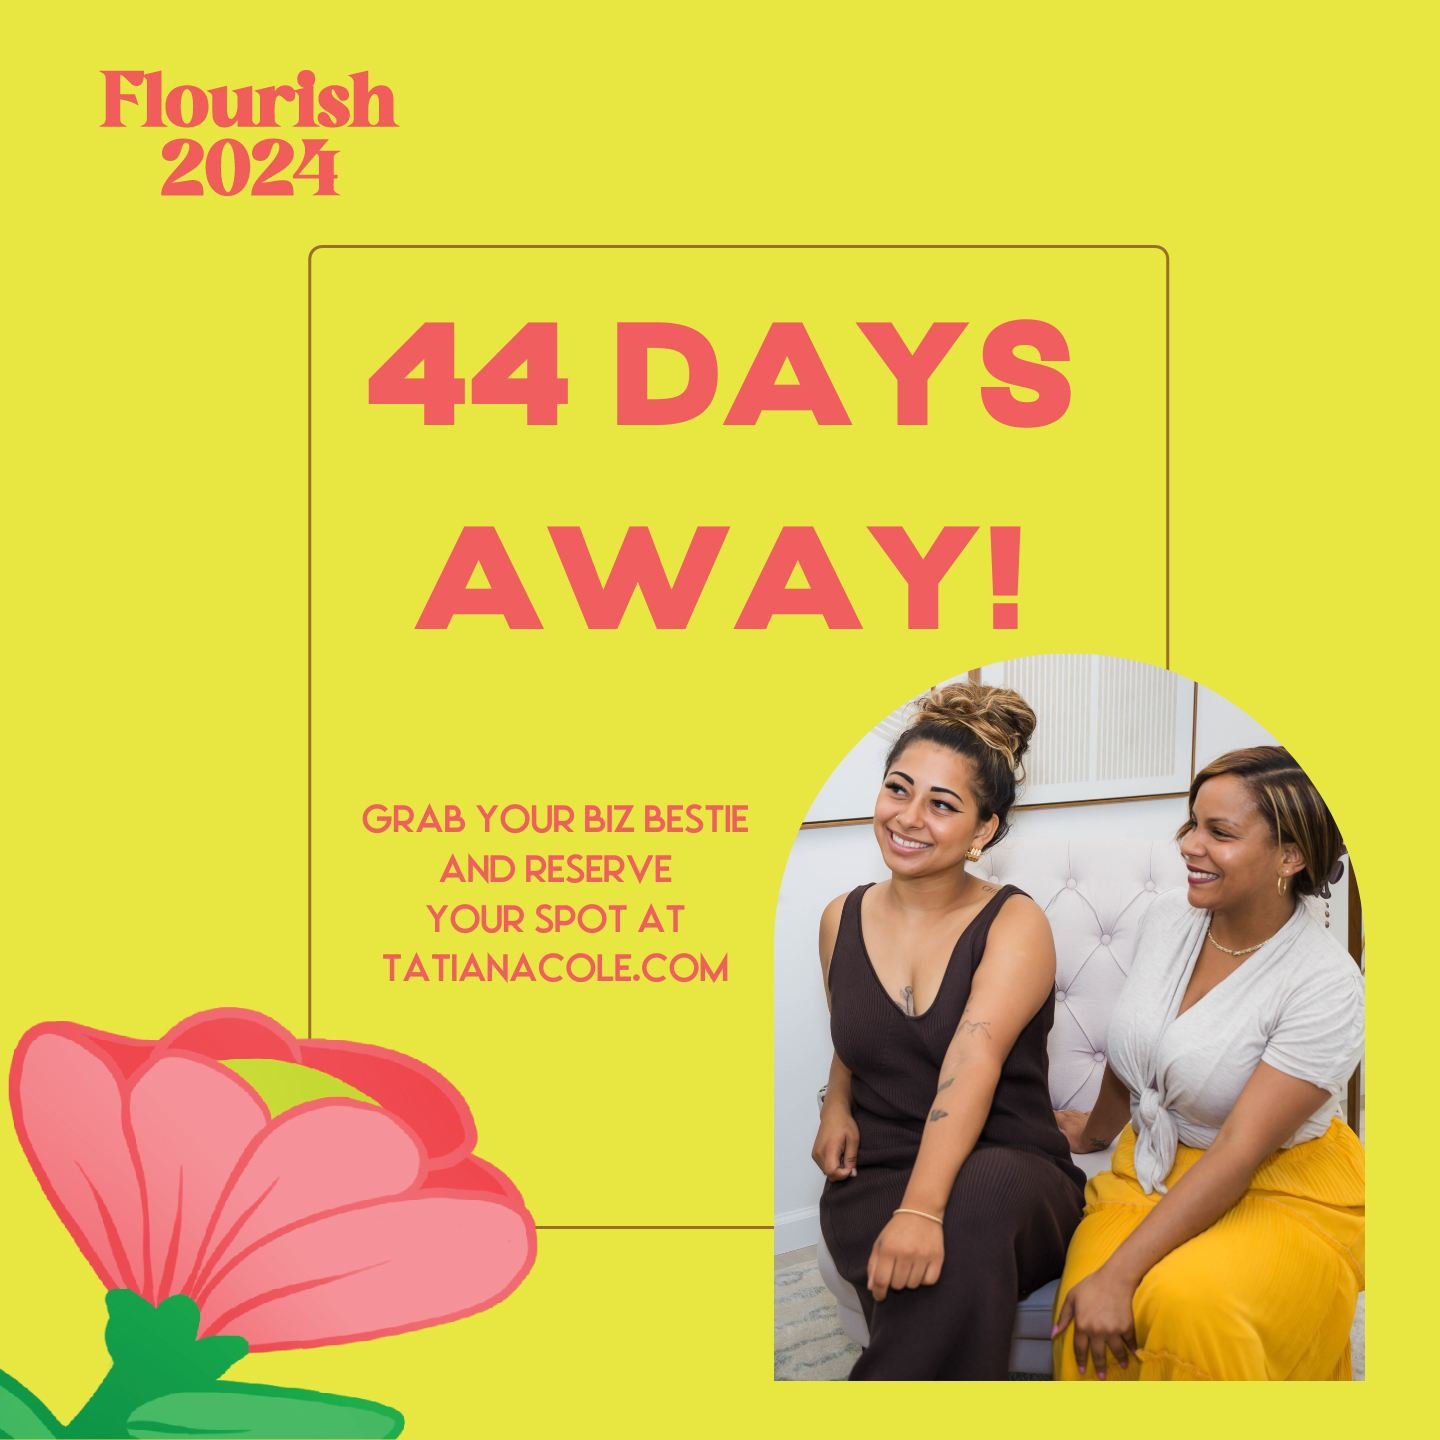 44 Days Away to biz bestie fun and transformation at the Flourish conference for women entrepreneurs!

Let's flourish in life and business by unpacking what our environment needs to look like for us to flourish. 

We're meeting at the beautiful PINE 